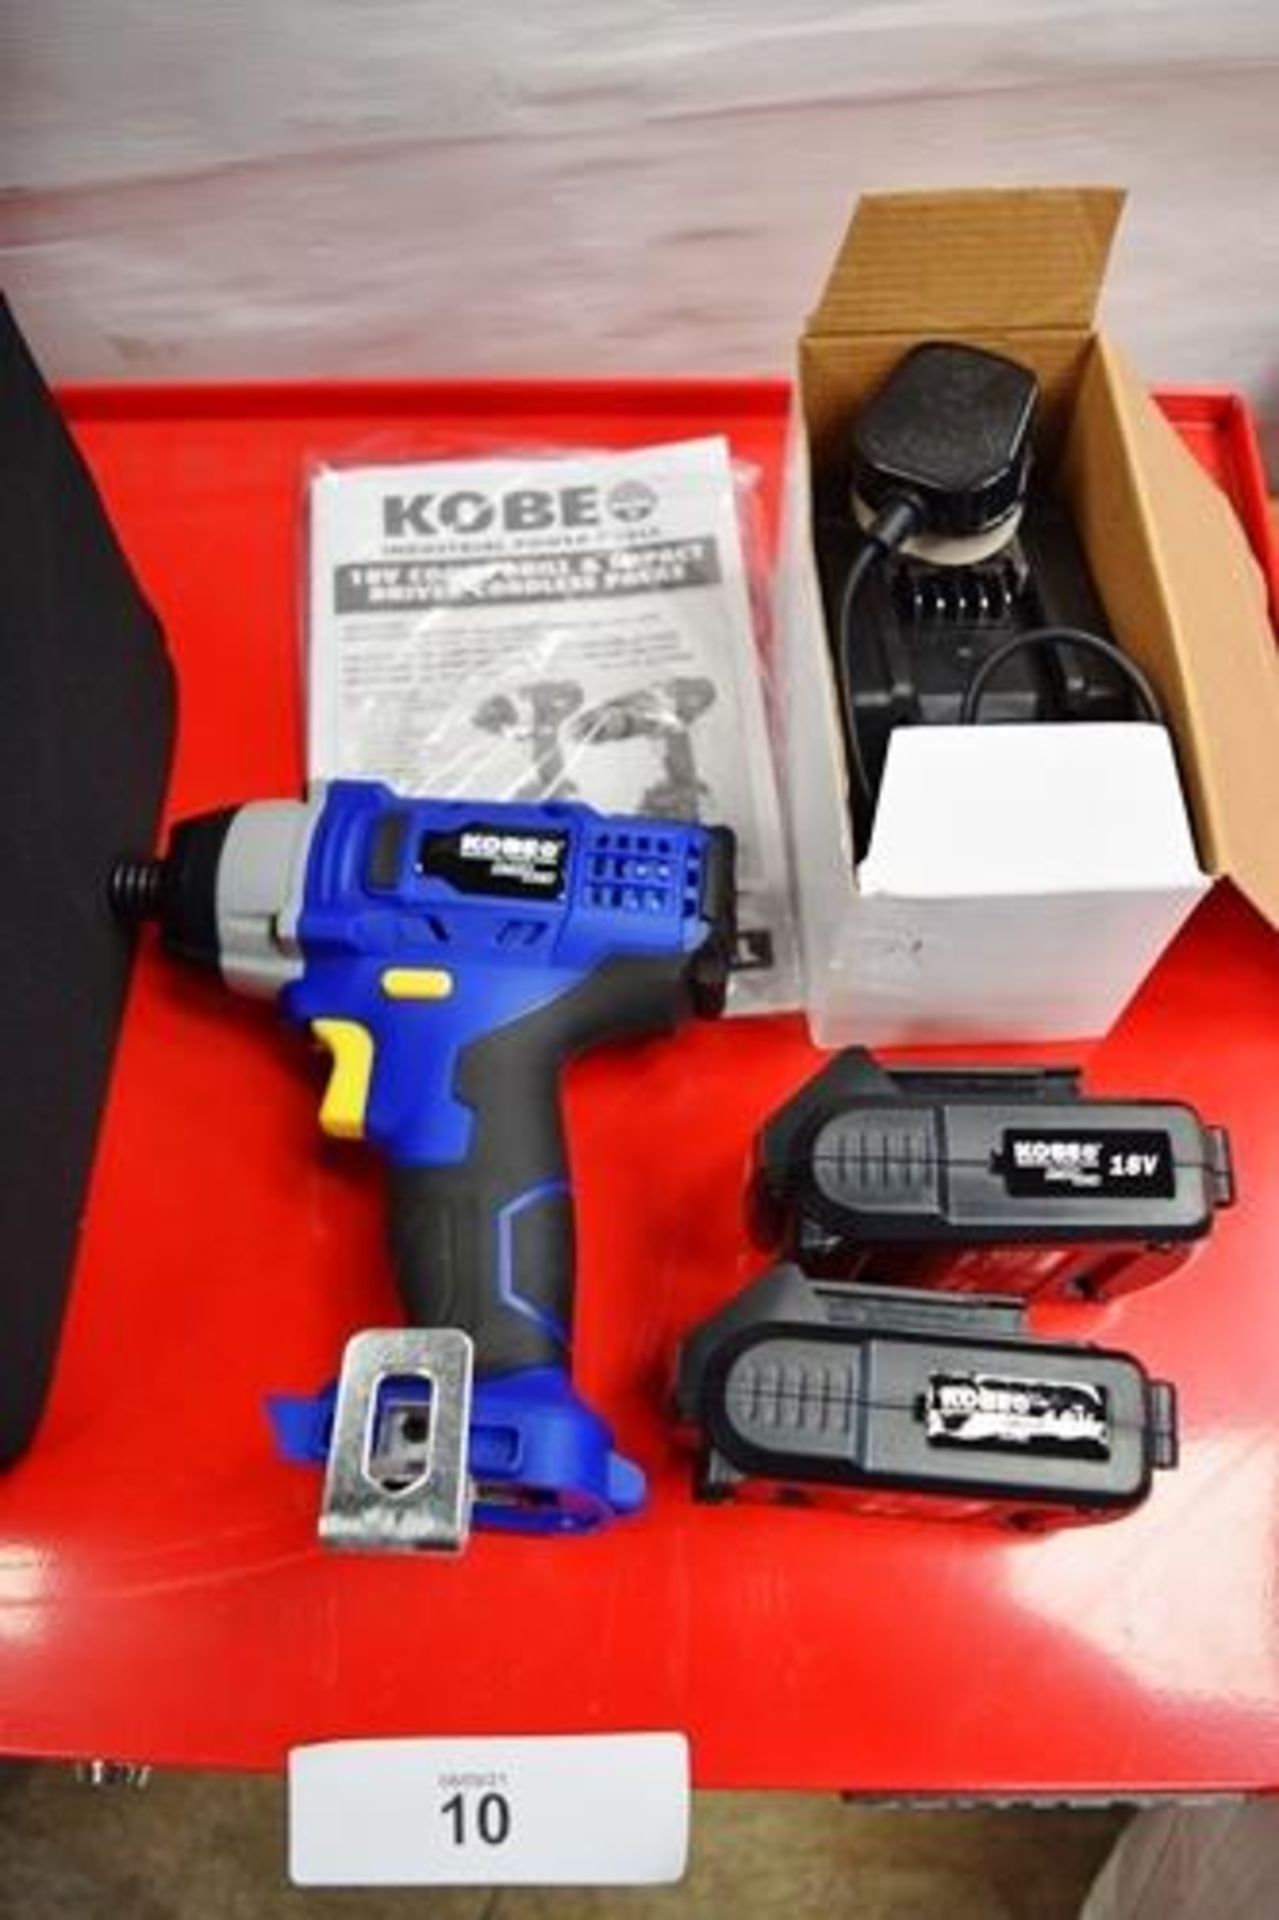 3 x Kobe 18V combi drill impact driver drills each with 4 x 18V batteries, 2 x chargers and 2 x - Image 3 of 3